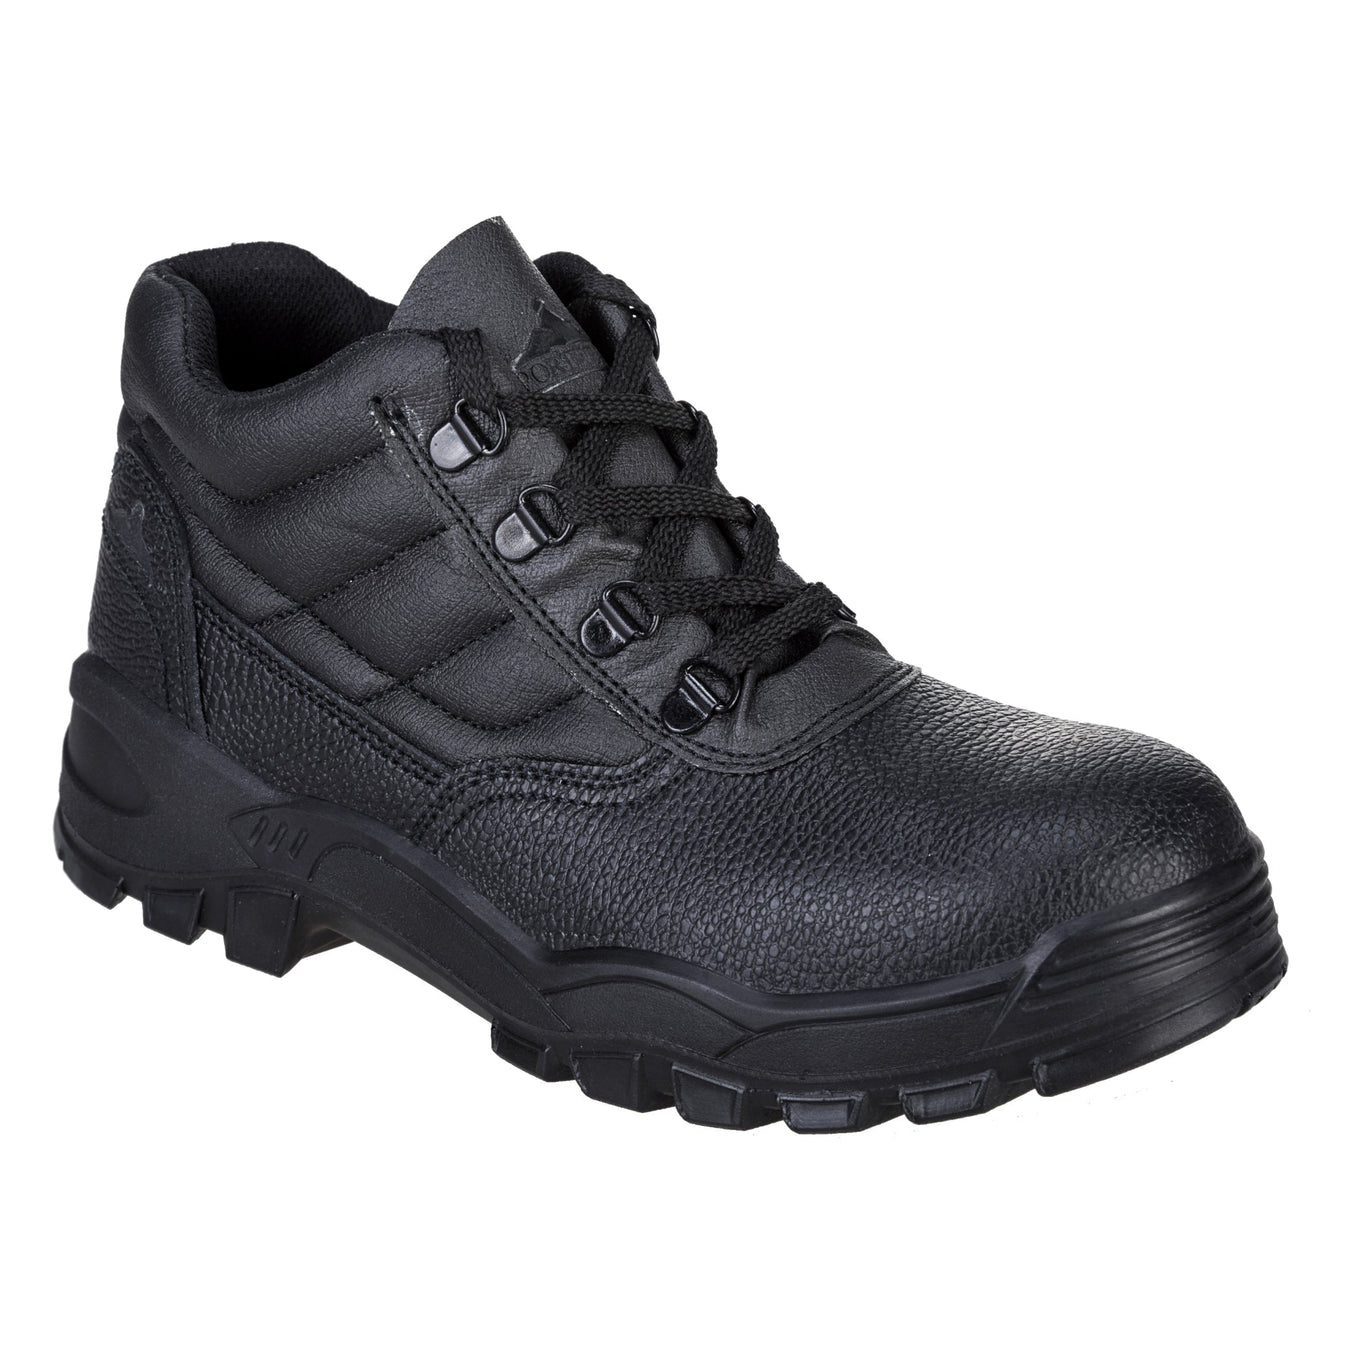 Portwest Safety Shoes & Boots